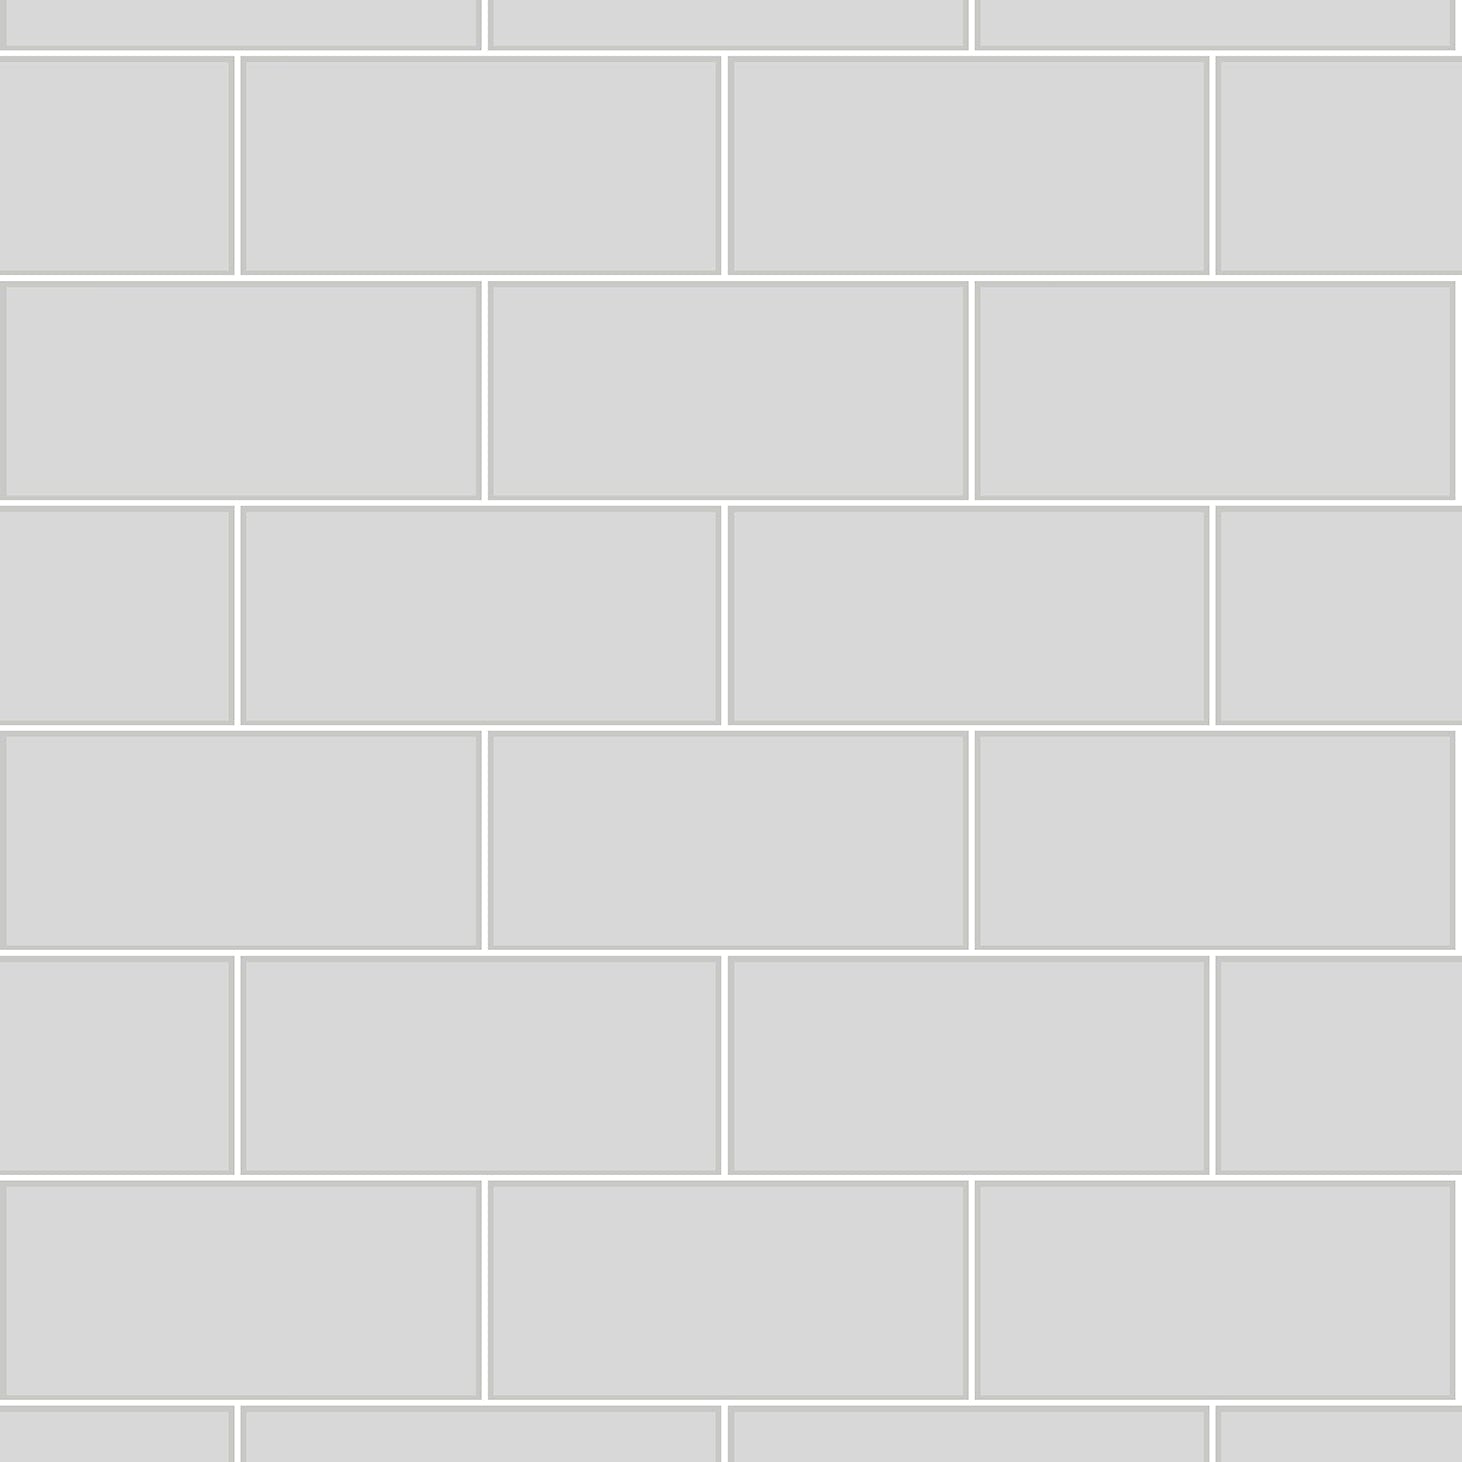 Find 2767-23752 Galley Light Grey Subway Tile Techniques & Finishes III Brewster